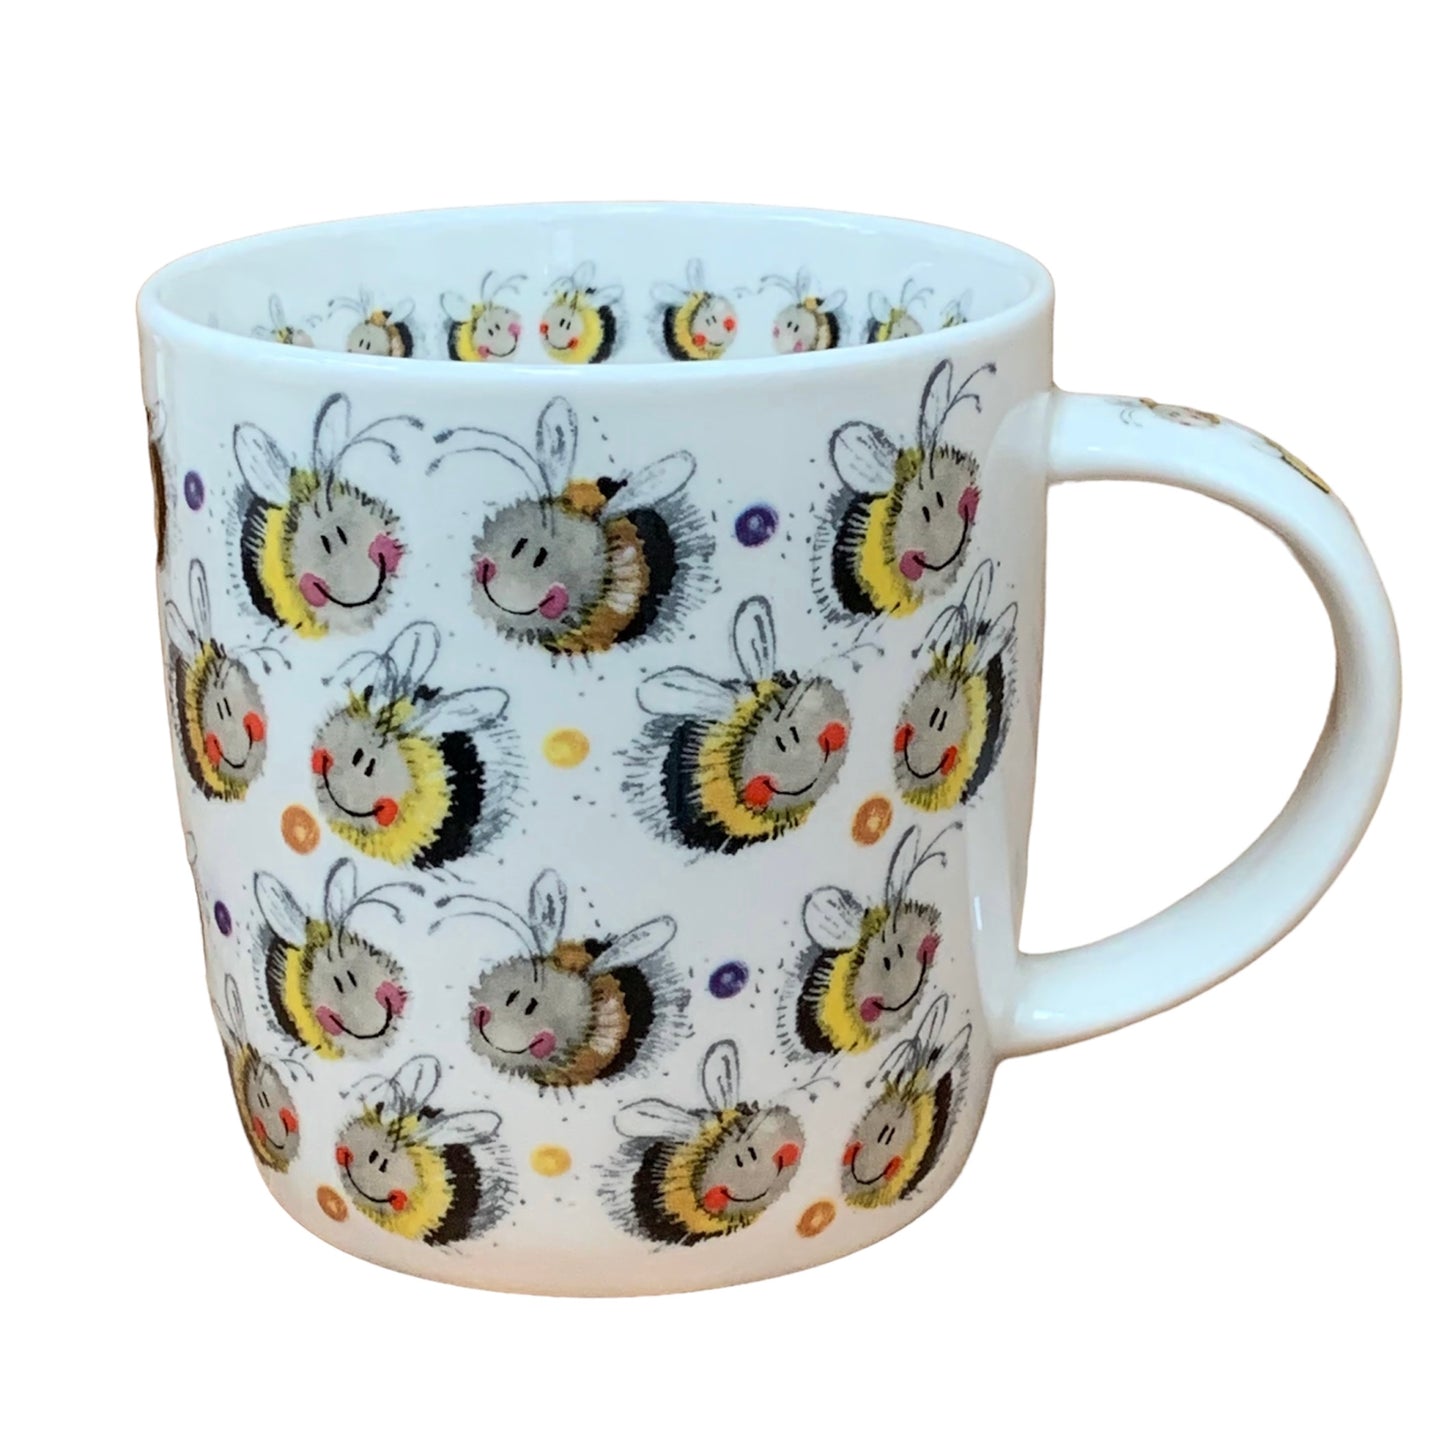 This Alex Clark mug is illustrated with lots of lovely happy bumble bees all over it.  This mug also features a bee illustration around the inside rim & illustrations down the handle.  